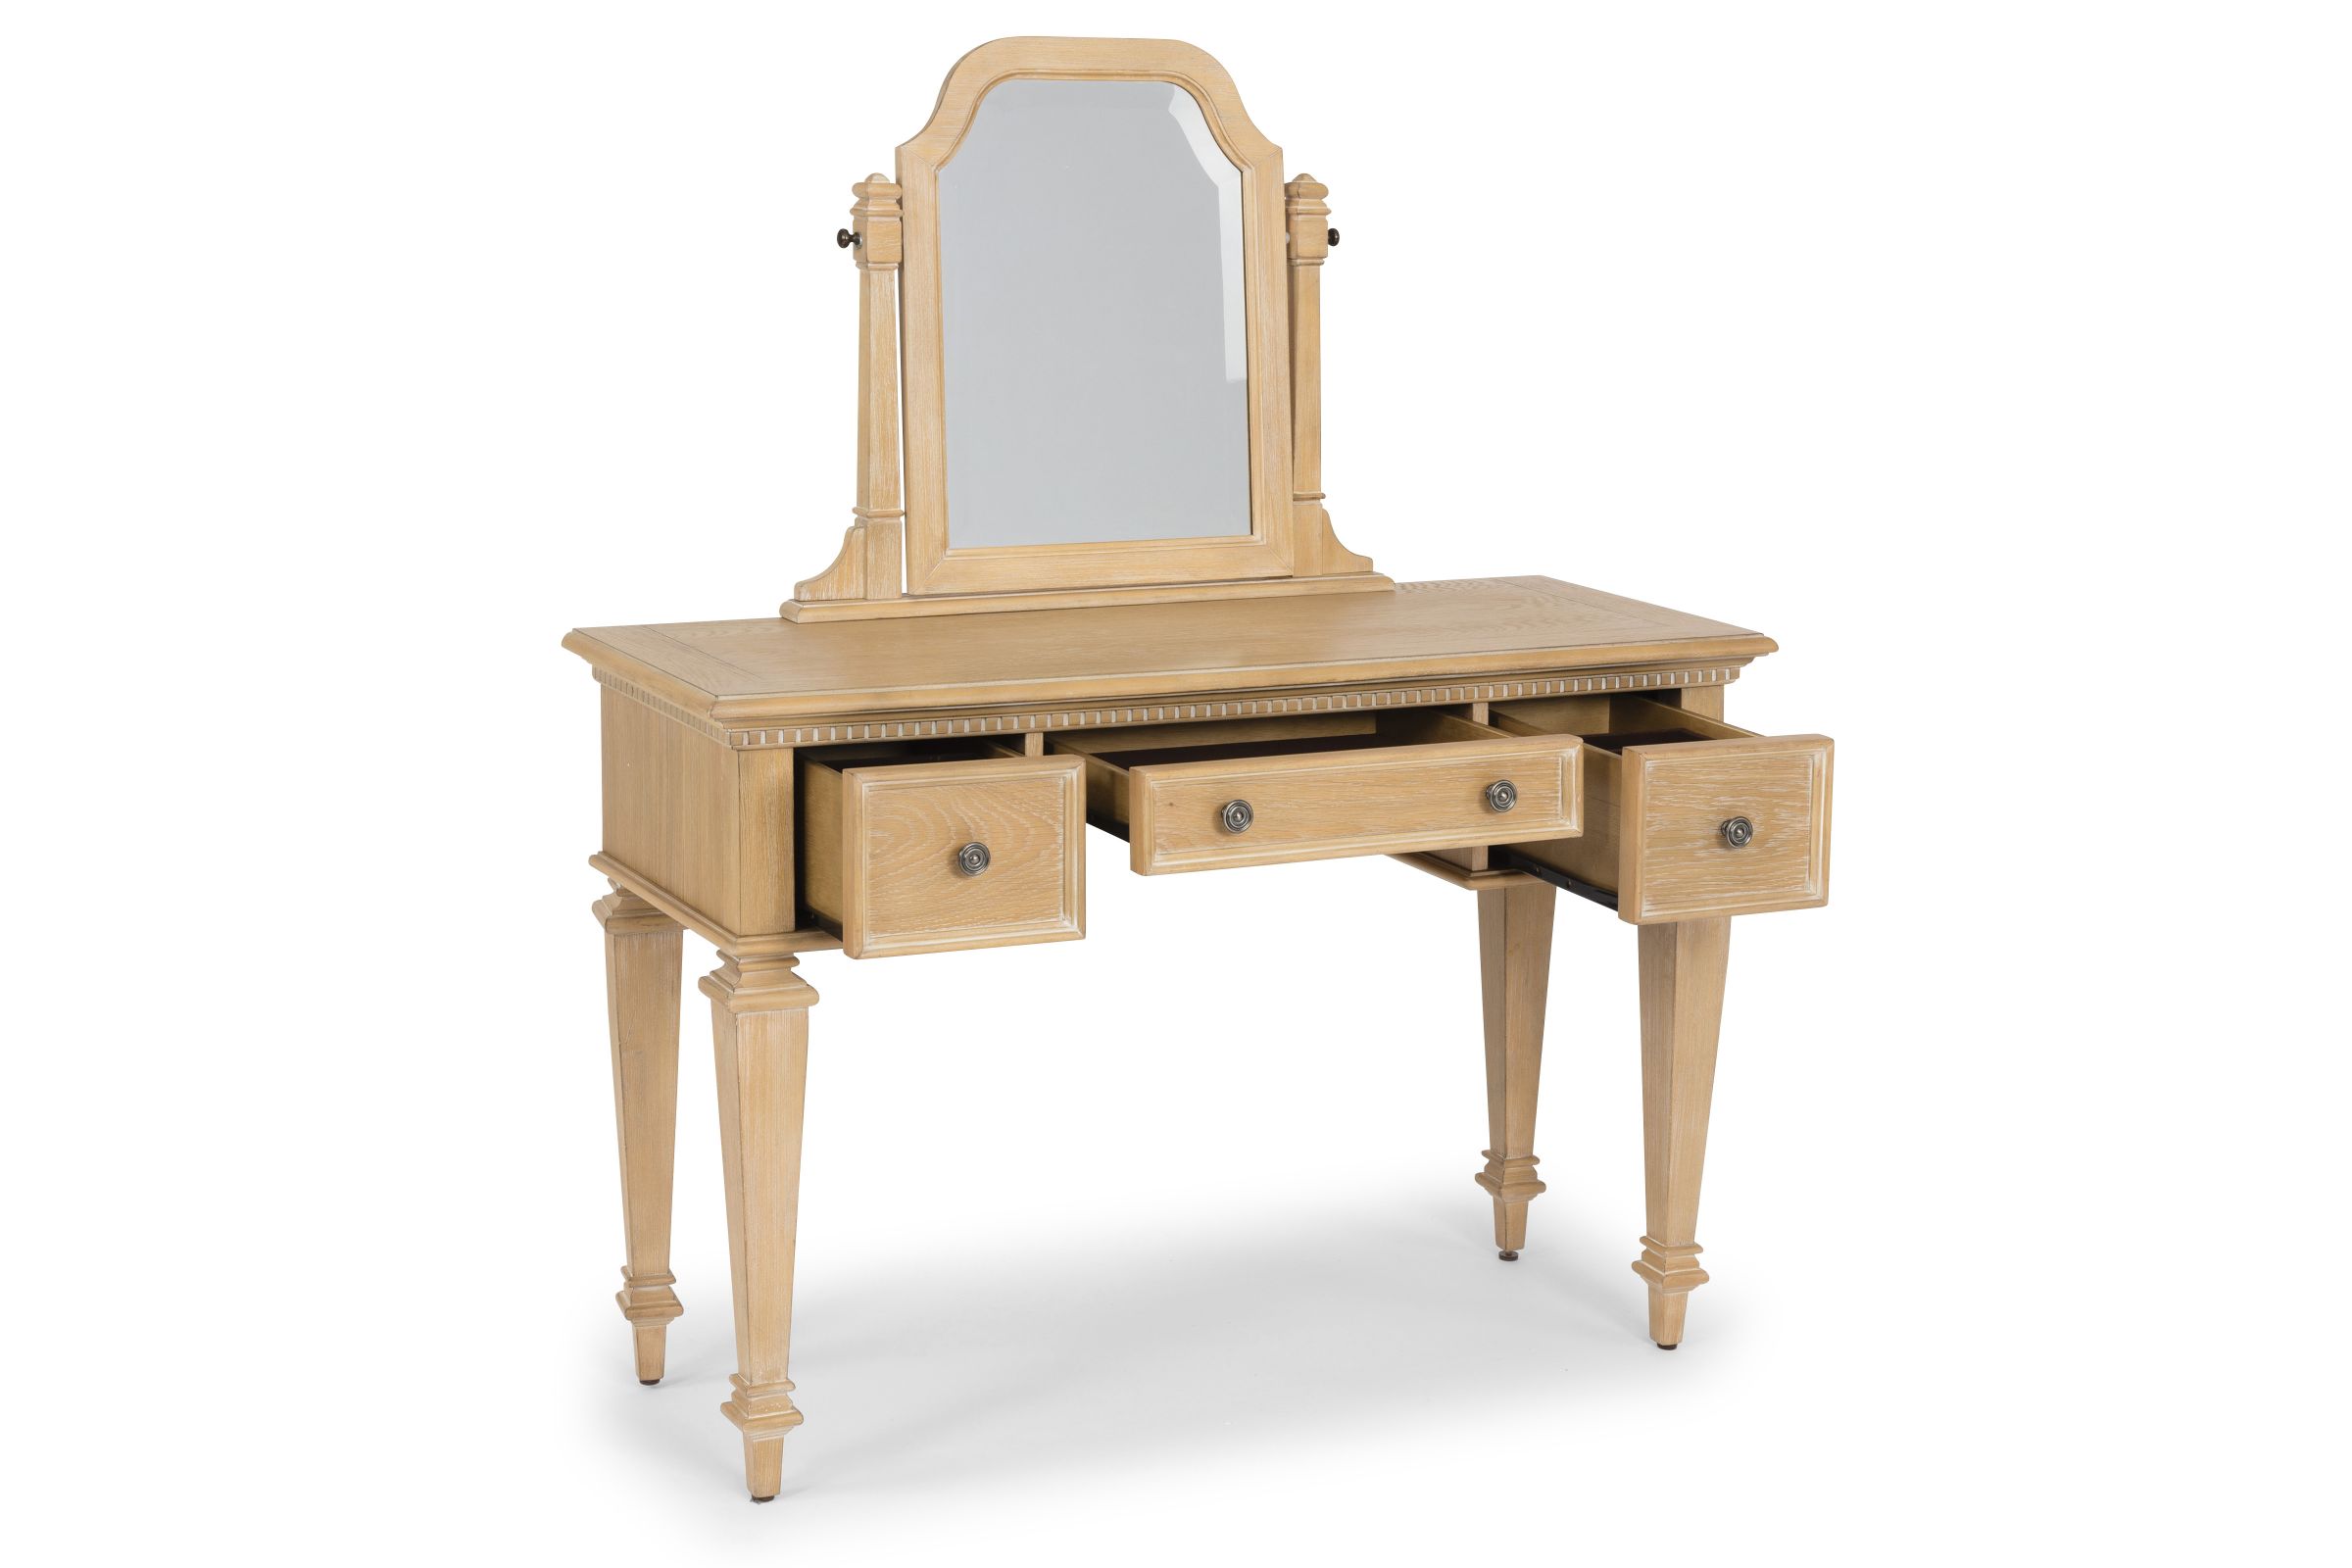 Manor House Vanity Table by homestyles